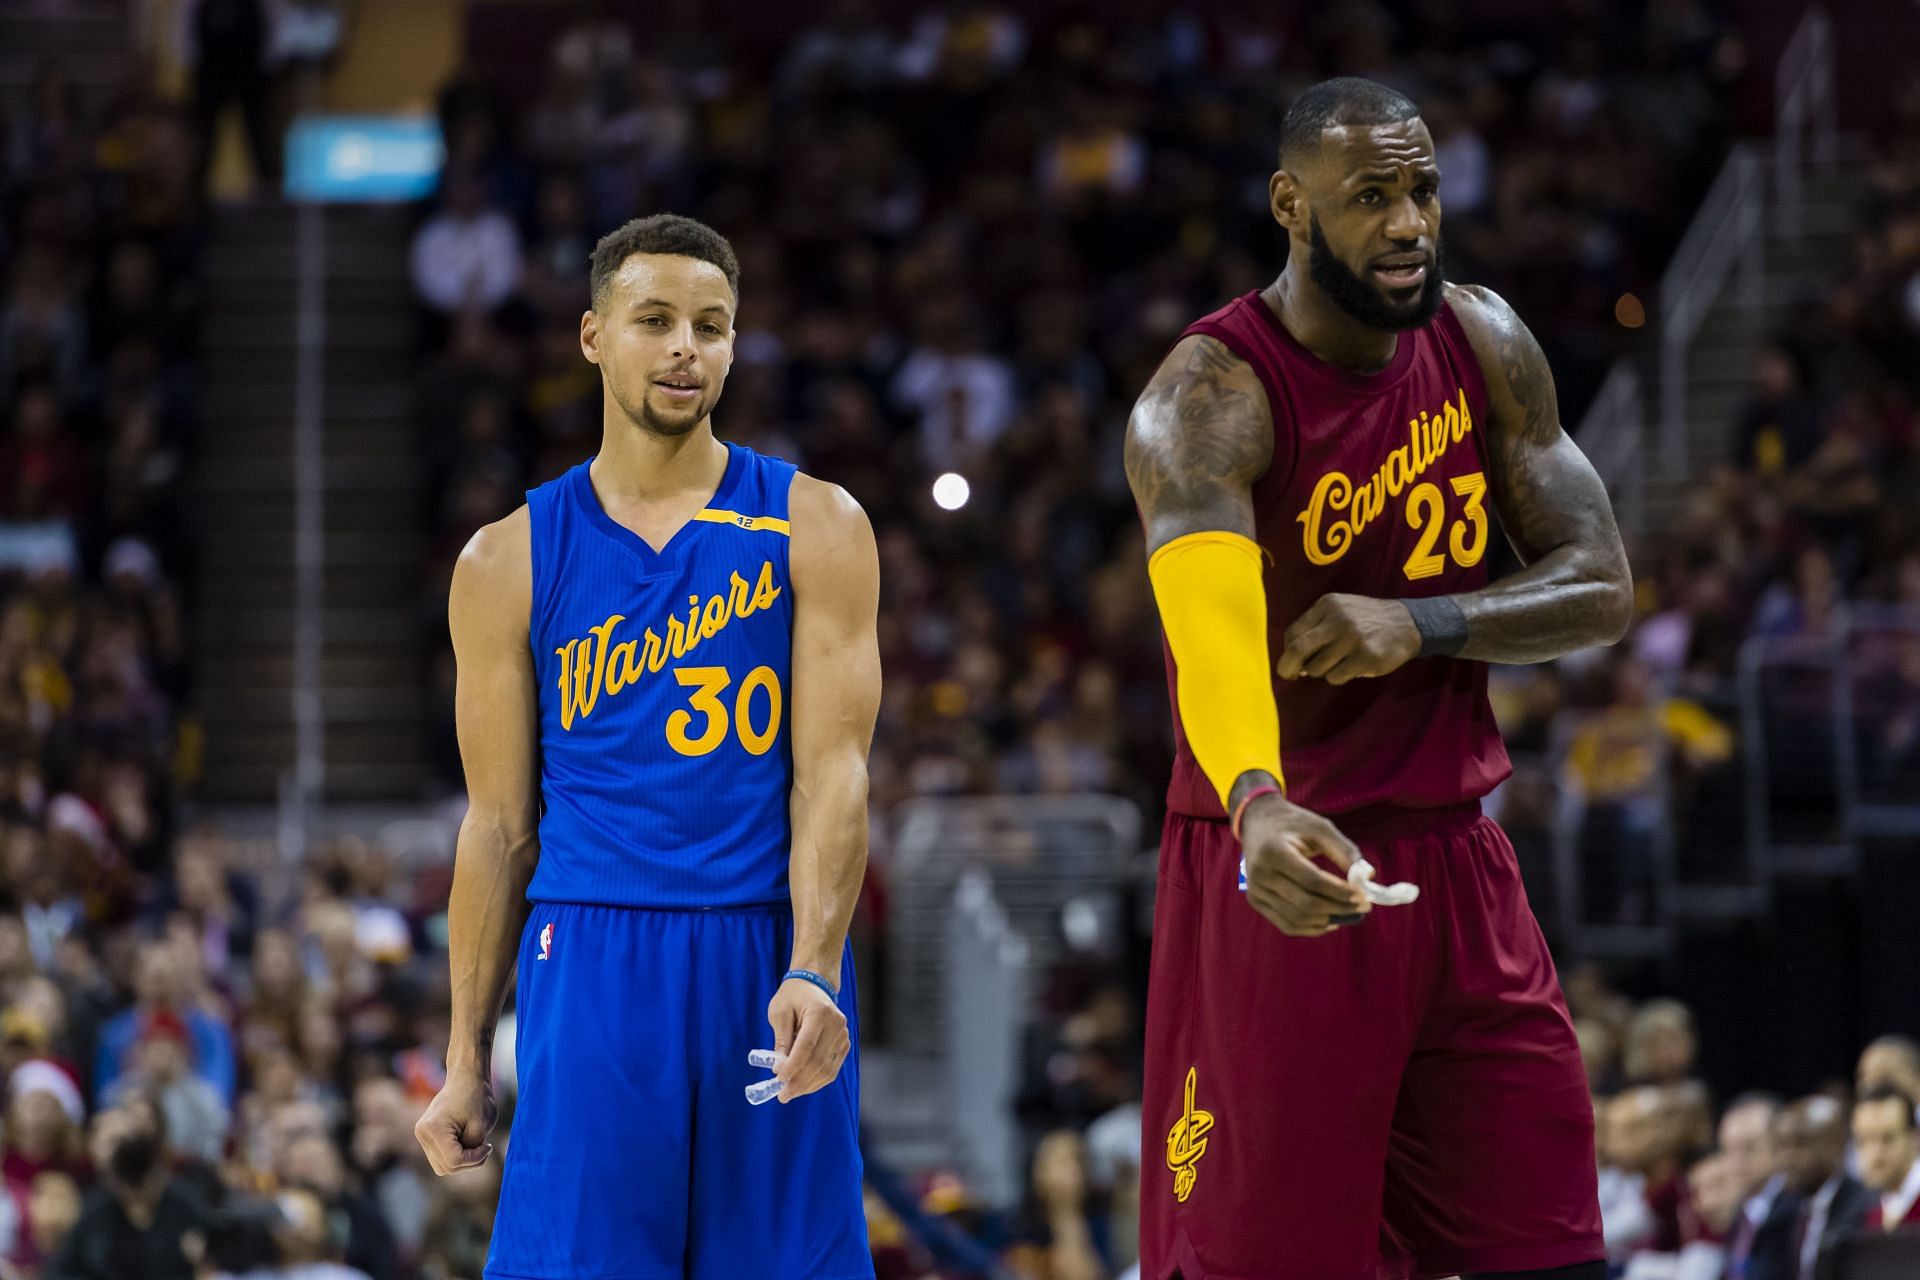 Steph Curry of the Golden State Warriors against LeBron James of the Cleveland Cavaliers on Christmas Day 2016